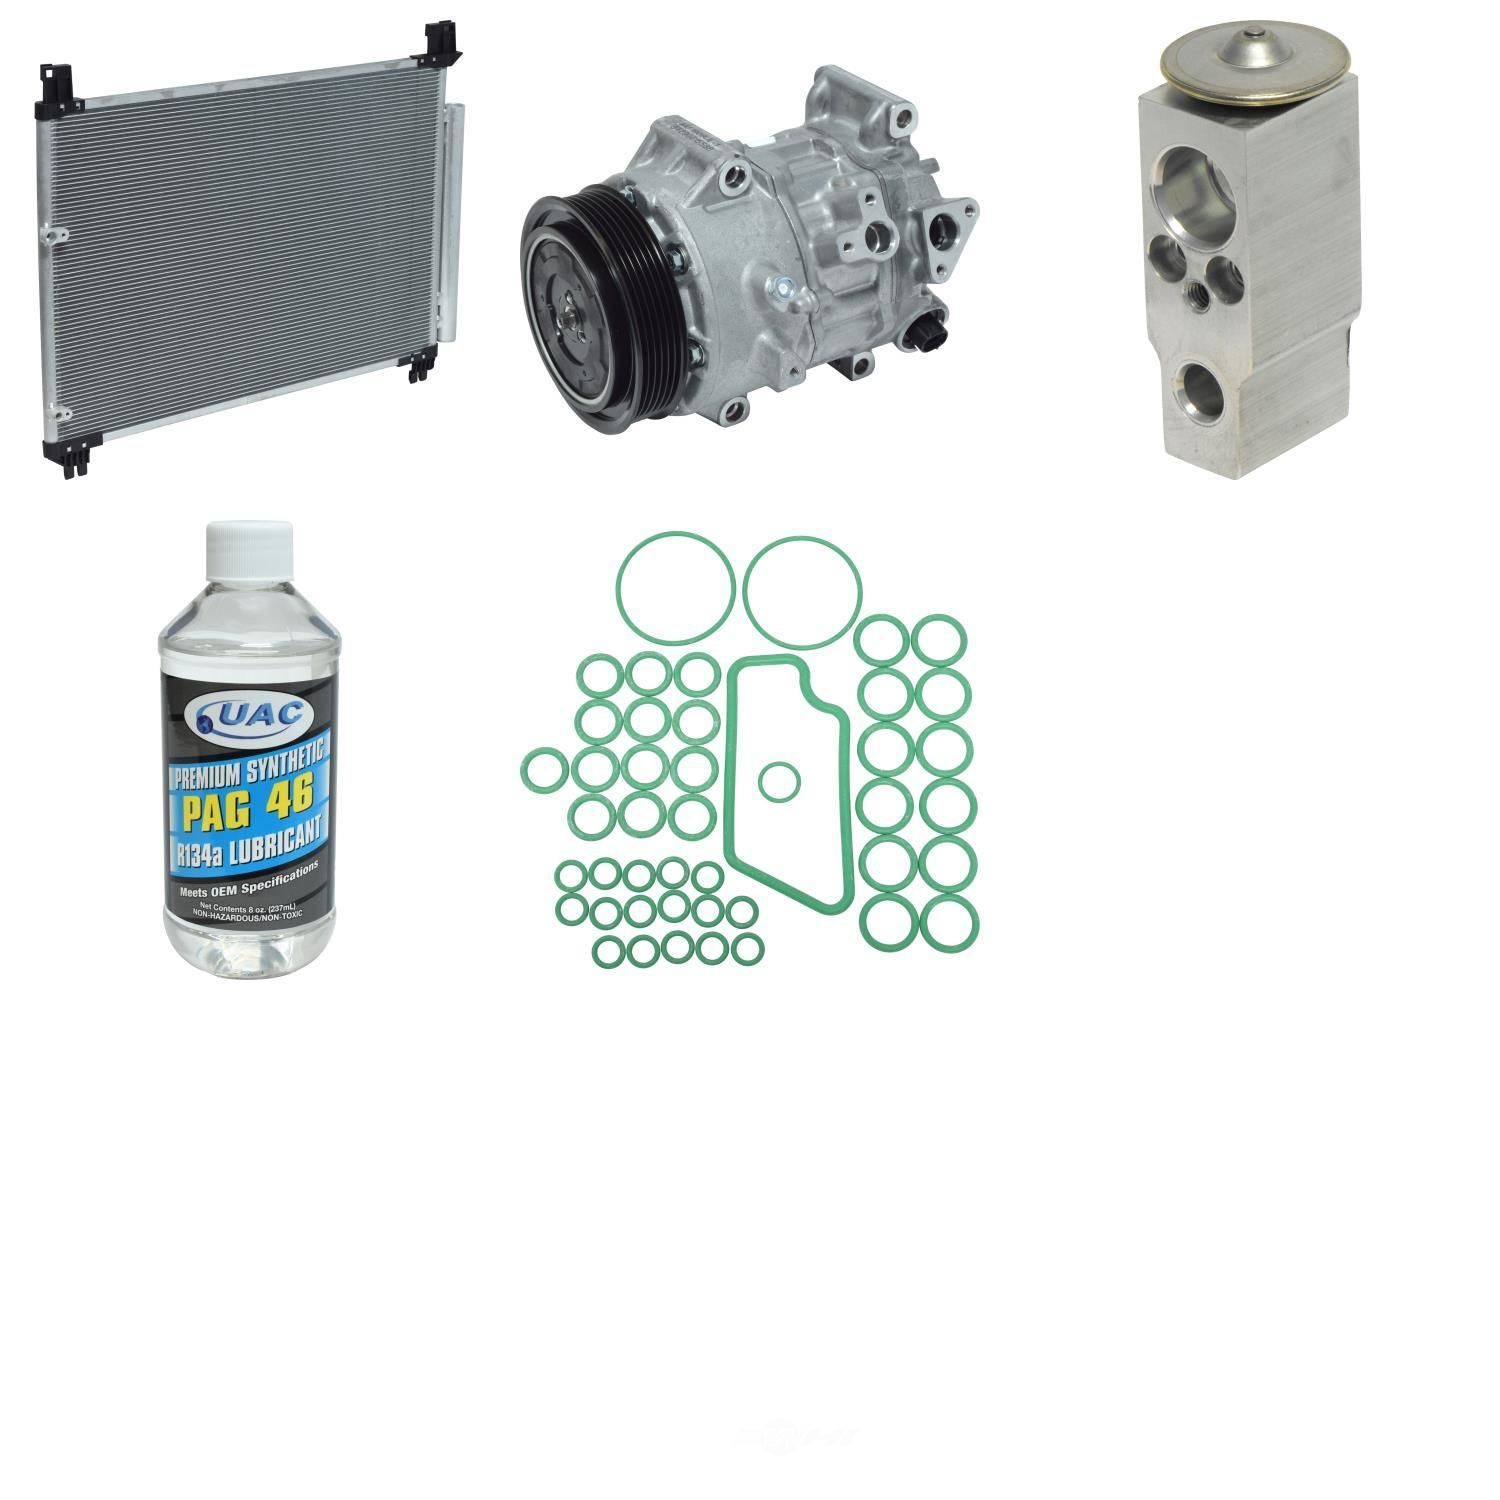 UNIVERSAL AIR CONDITIONER, INC. - Compressor-condenser Replacement Kit - UAC KT 5557A